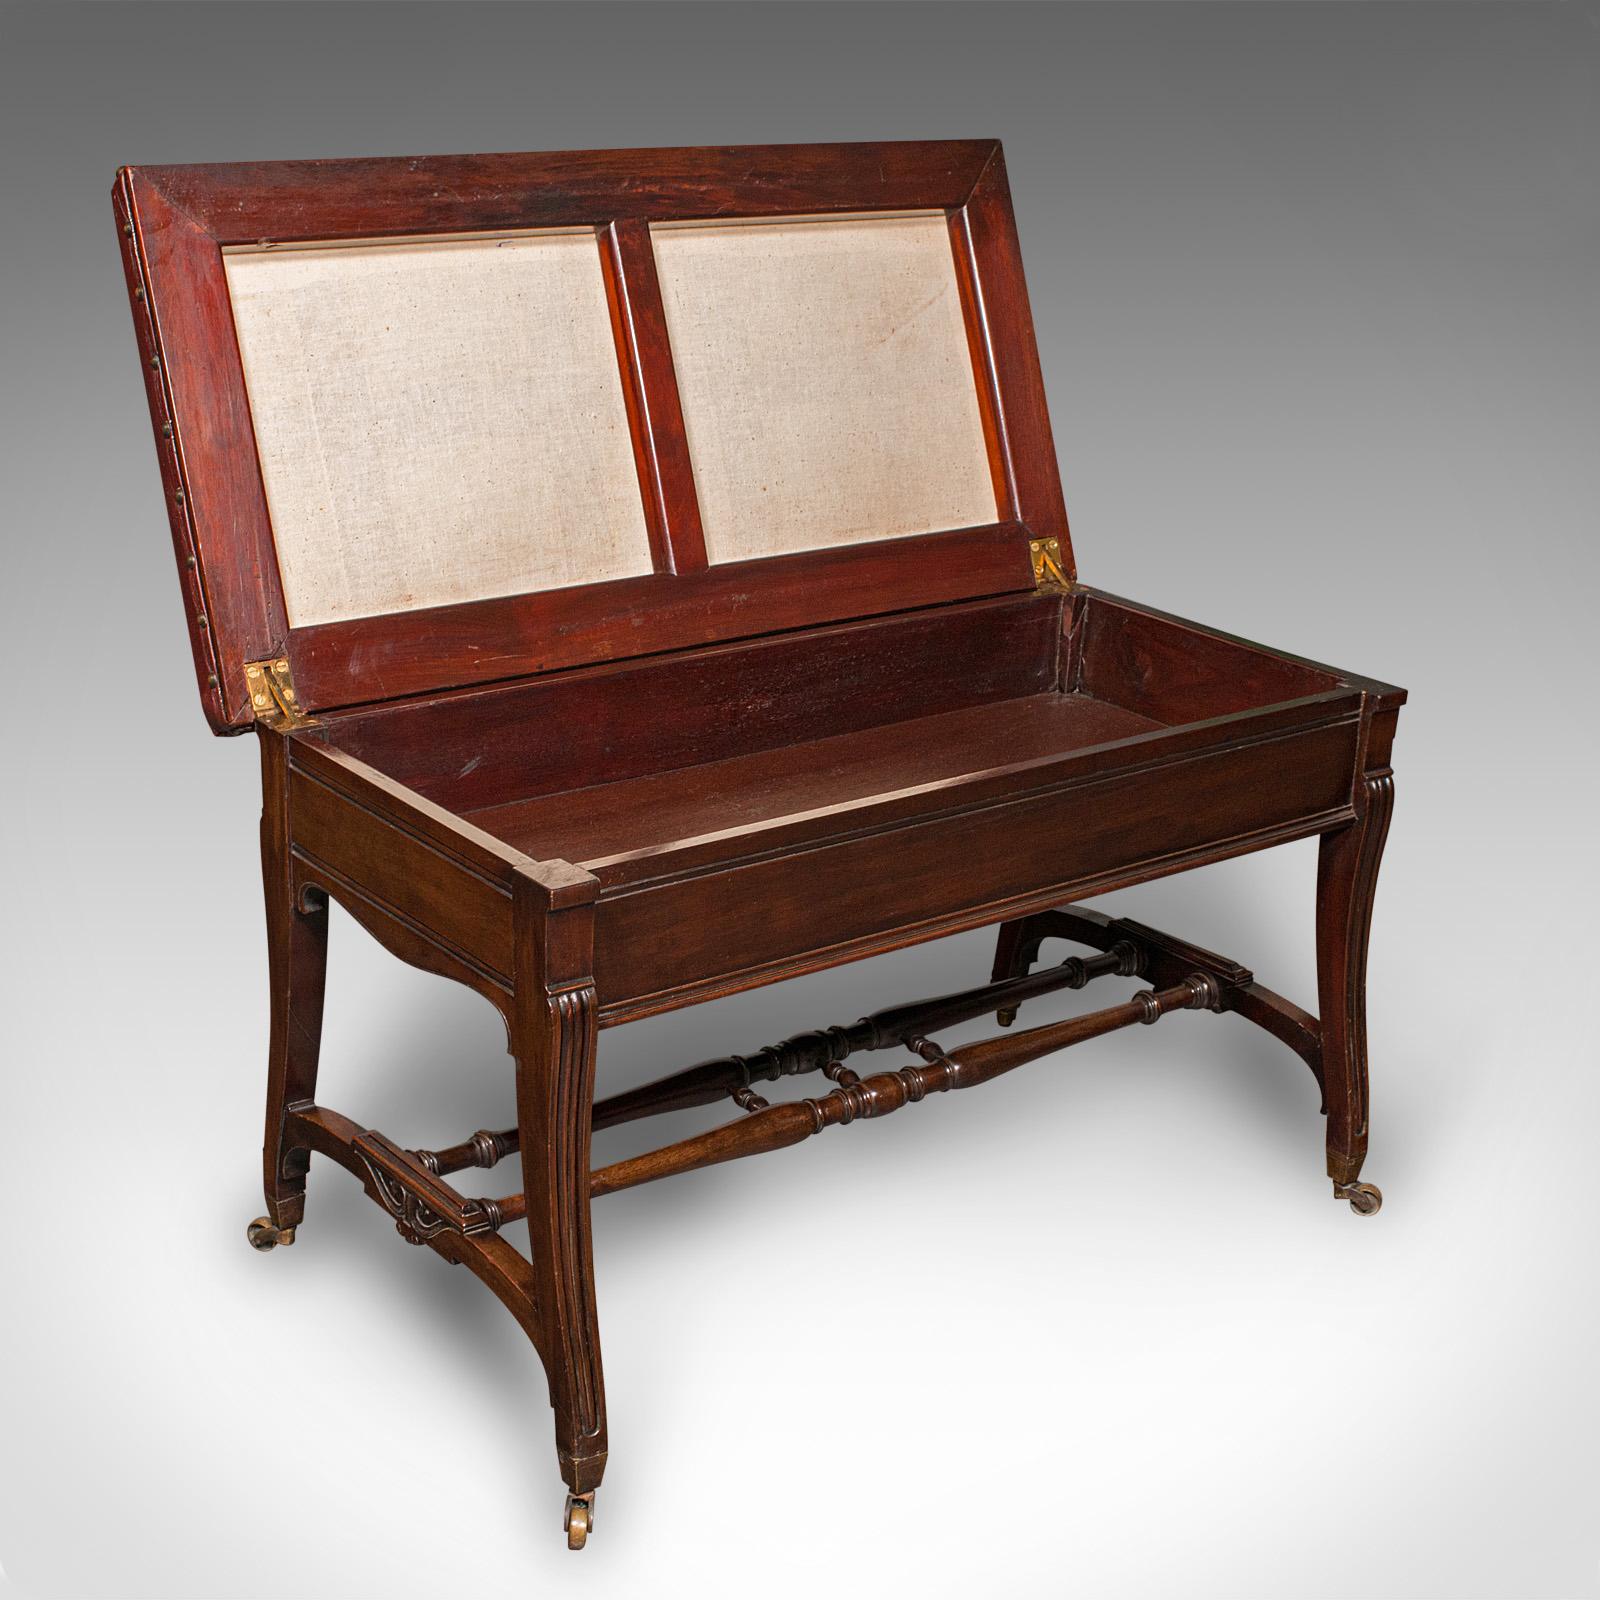 This is an antique duet music stool. An English, mahogany and leather recital bench or window seat, dating to the mid Victorian period, circa 1870.

Of wonderful appearance and versatile proportion
Displays a desirable aged patina and in good